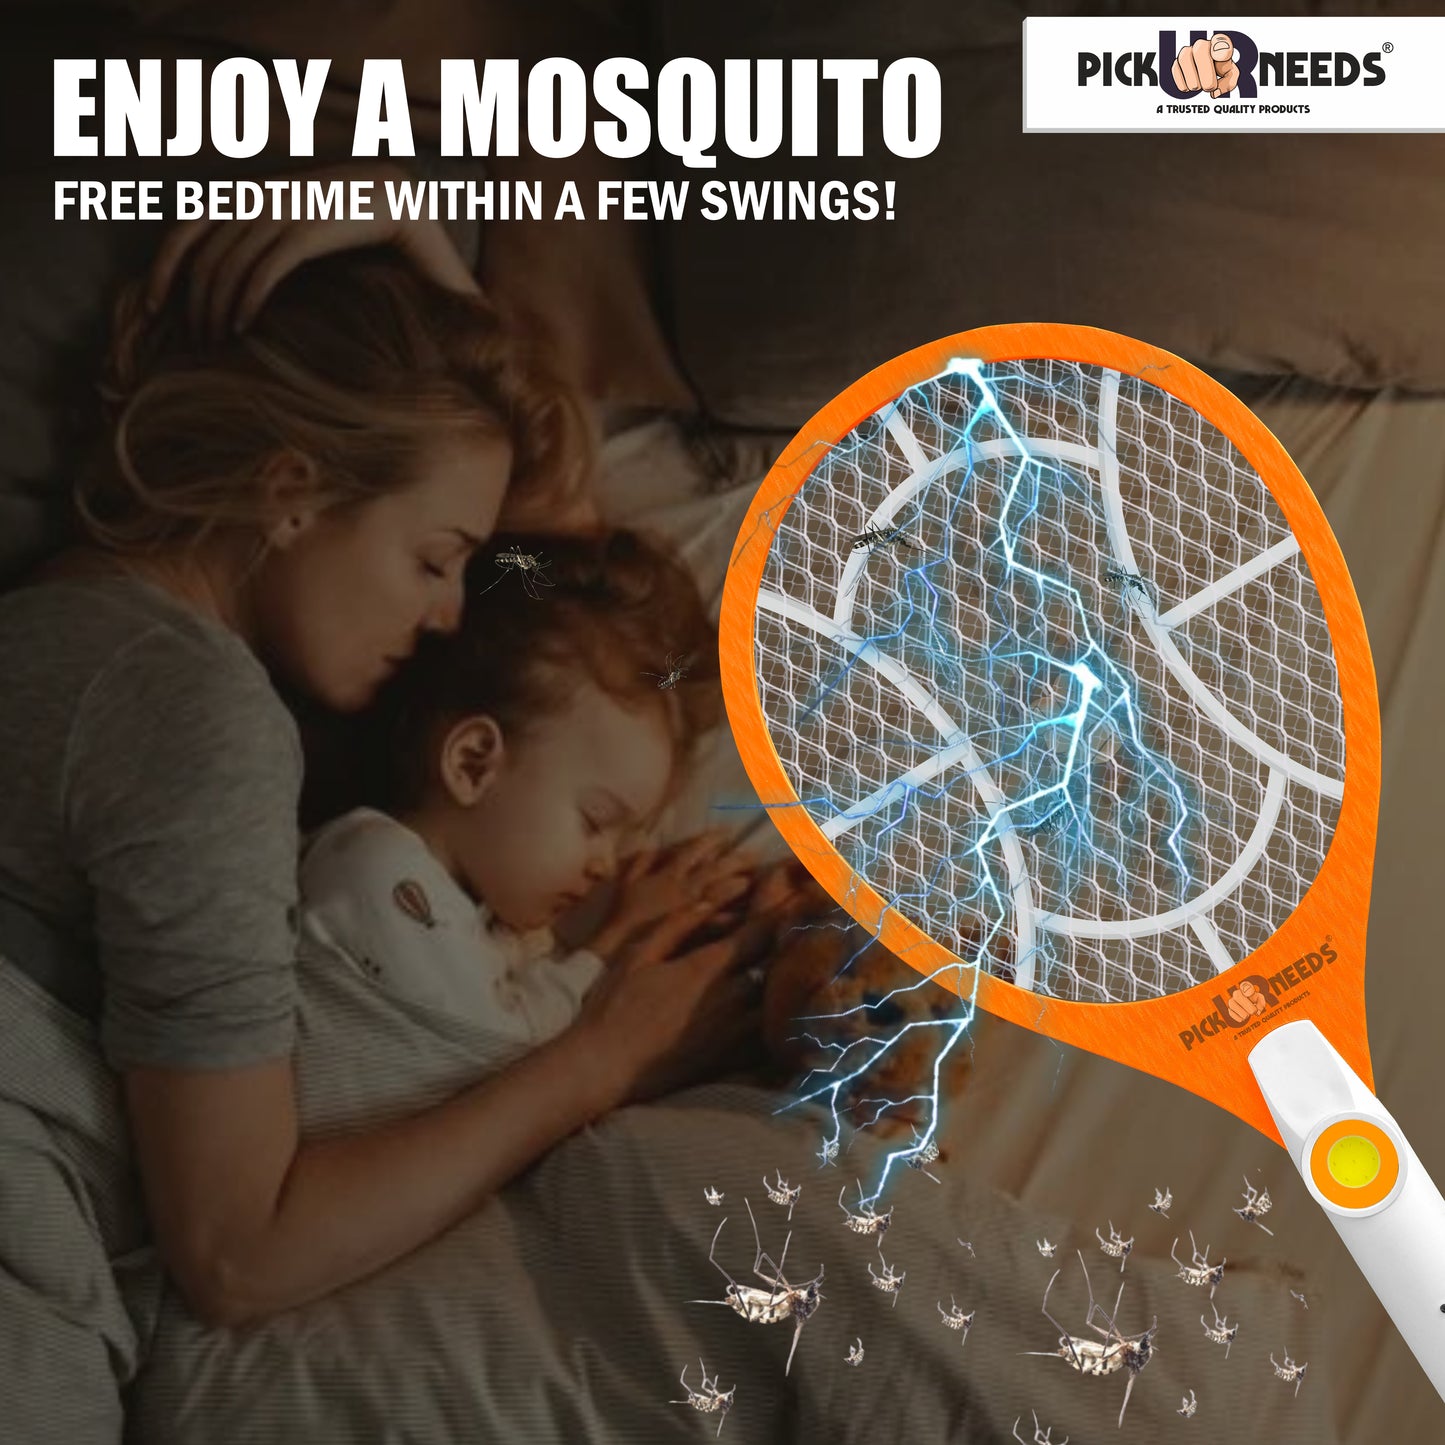 Pick Ur Needs Rechargeable Mosquito Racket / Bat With Cob Light For Mosquito Killing Electric Insect Killer Indoor, Outdoor (Bat)